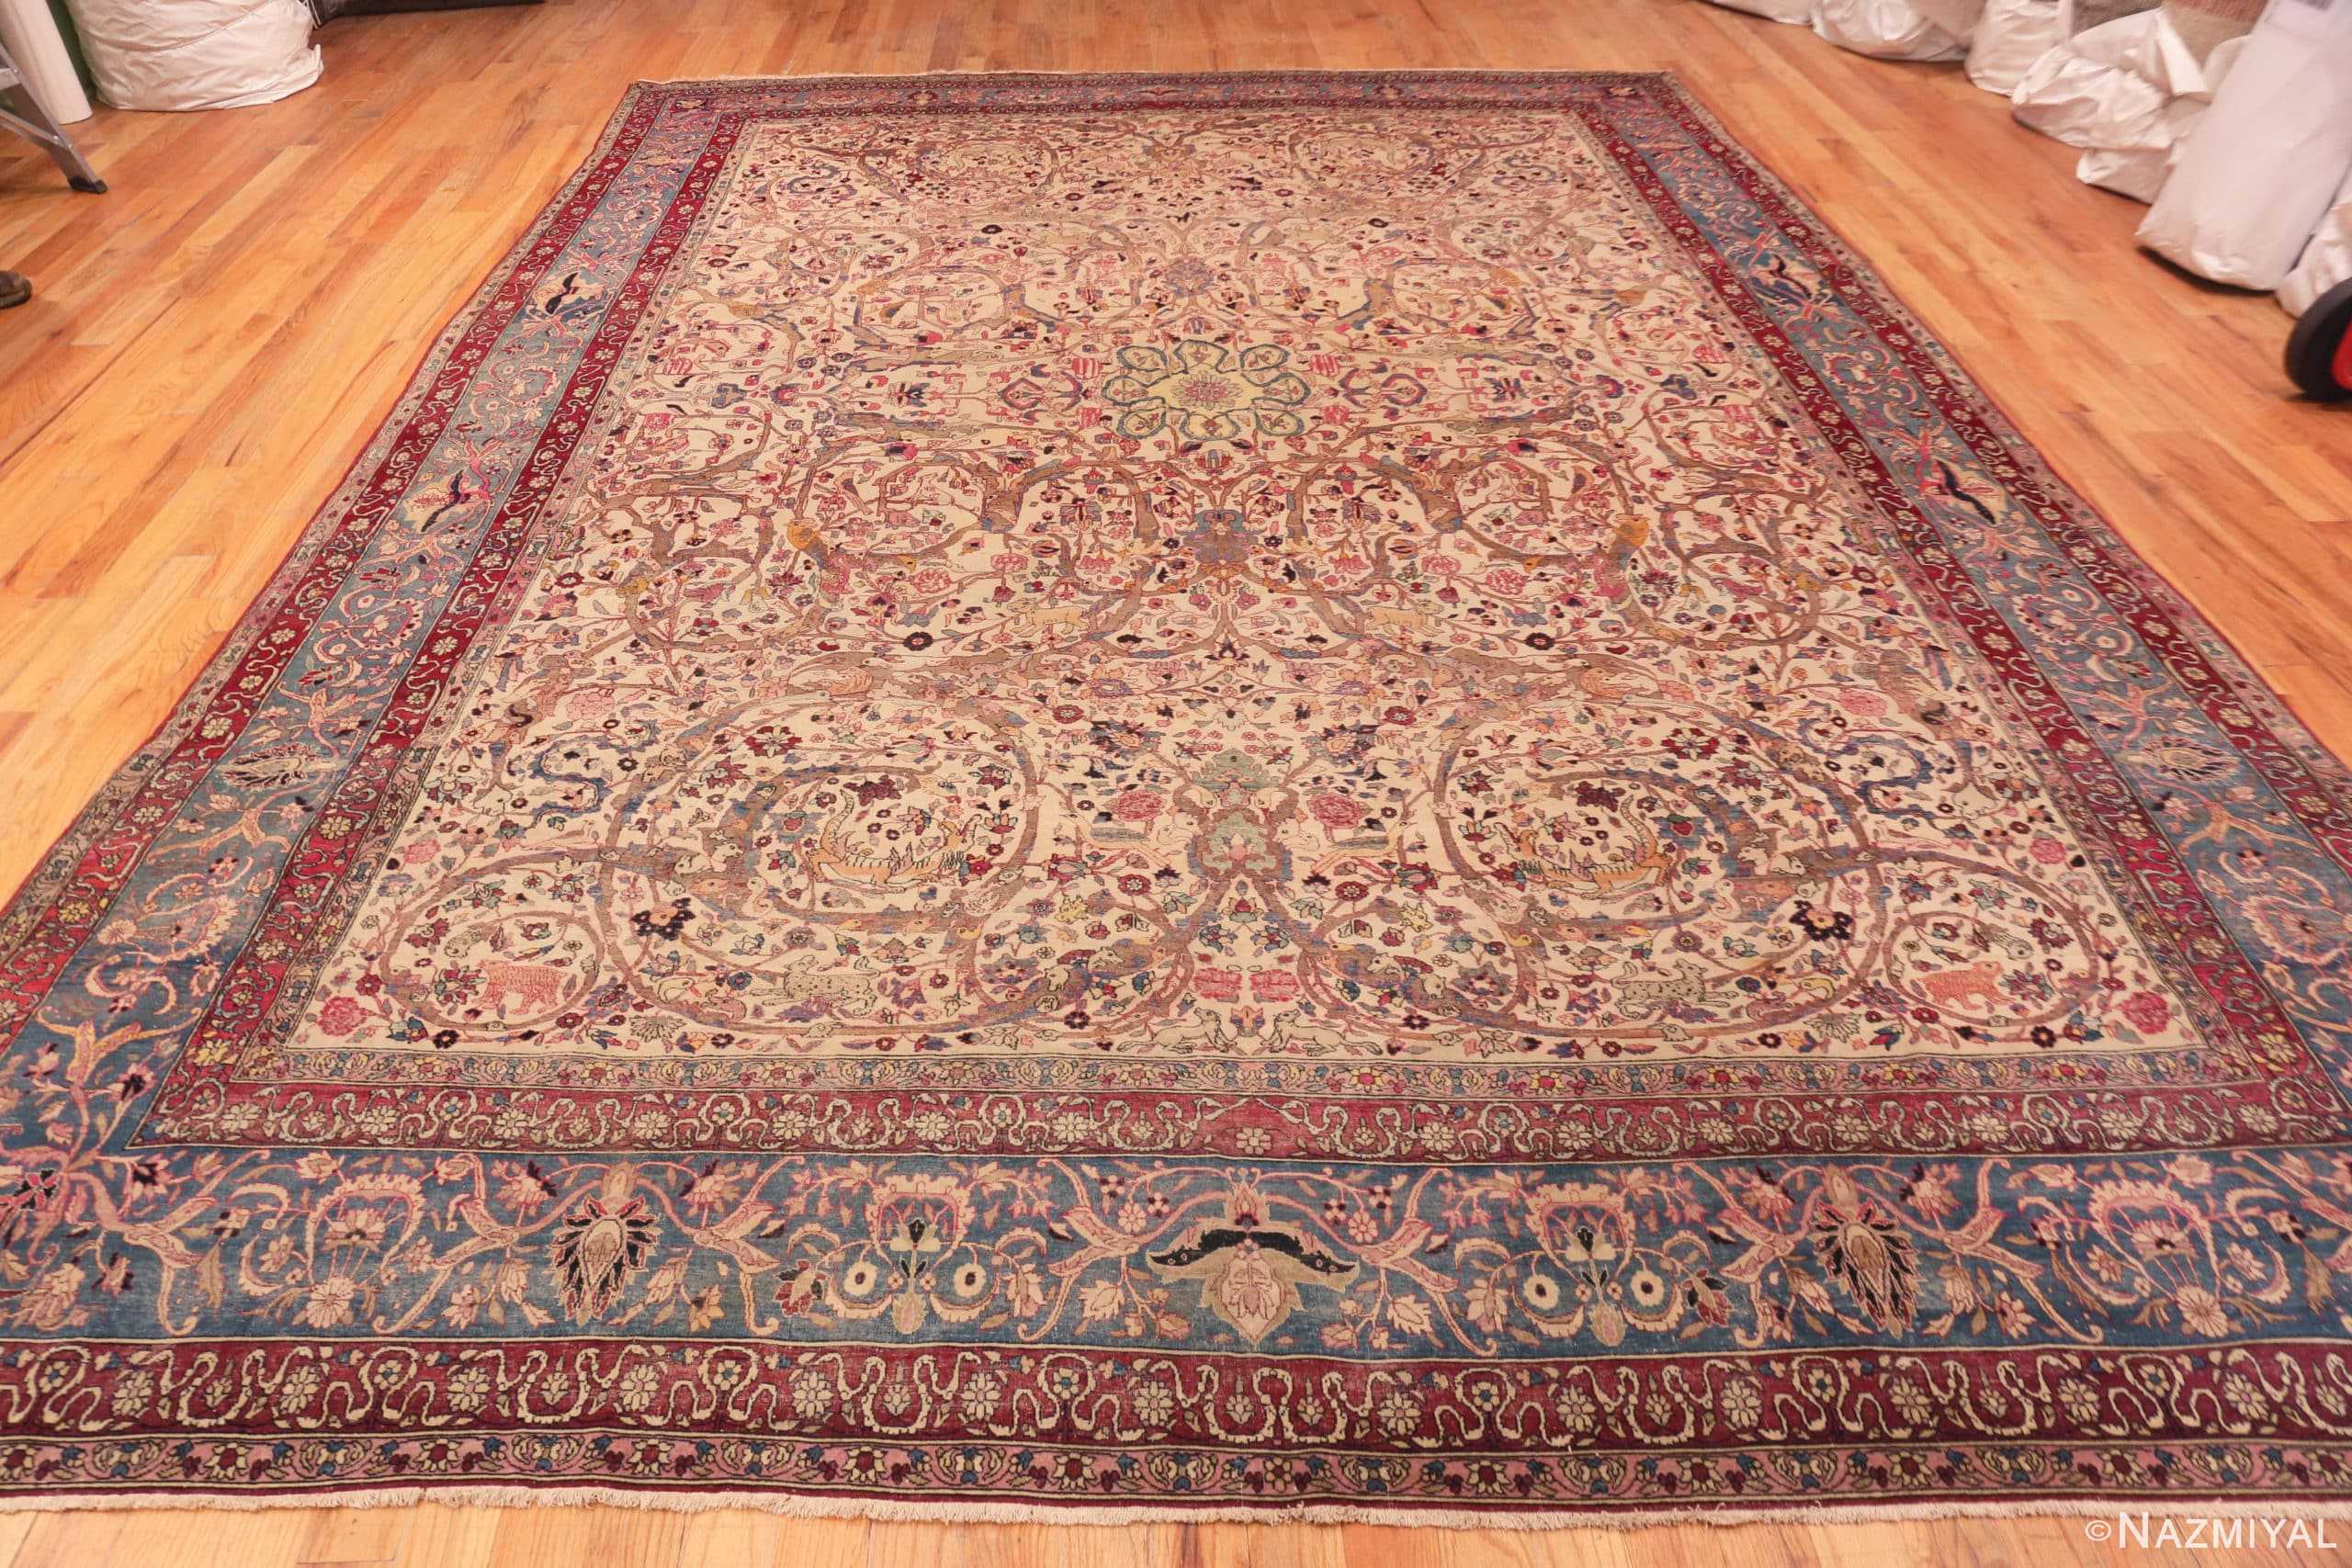 Whole View Of Antique Persian Tehran Area Rug 71106 by Nazmiyal Antique Rugs